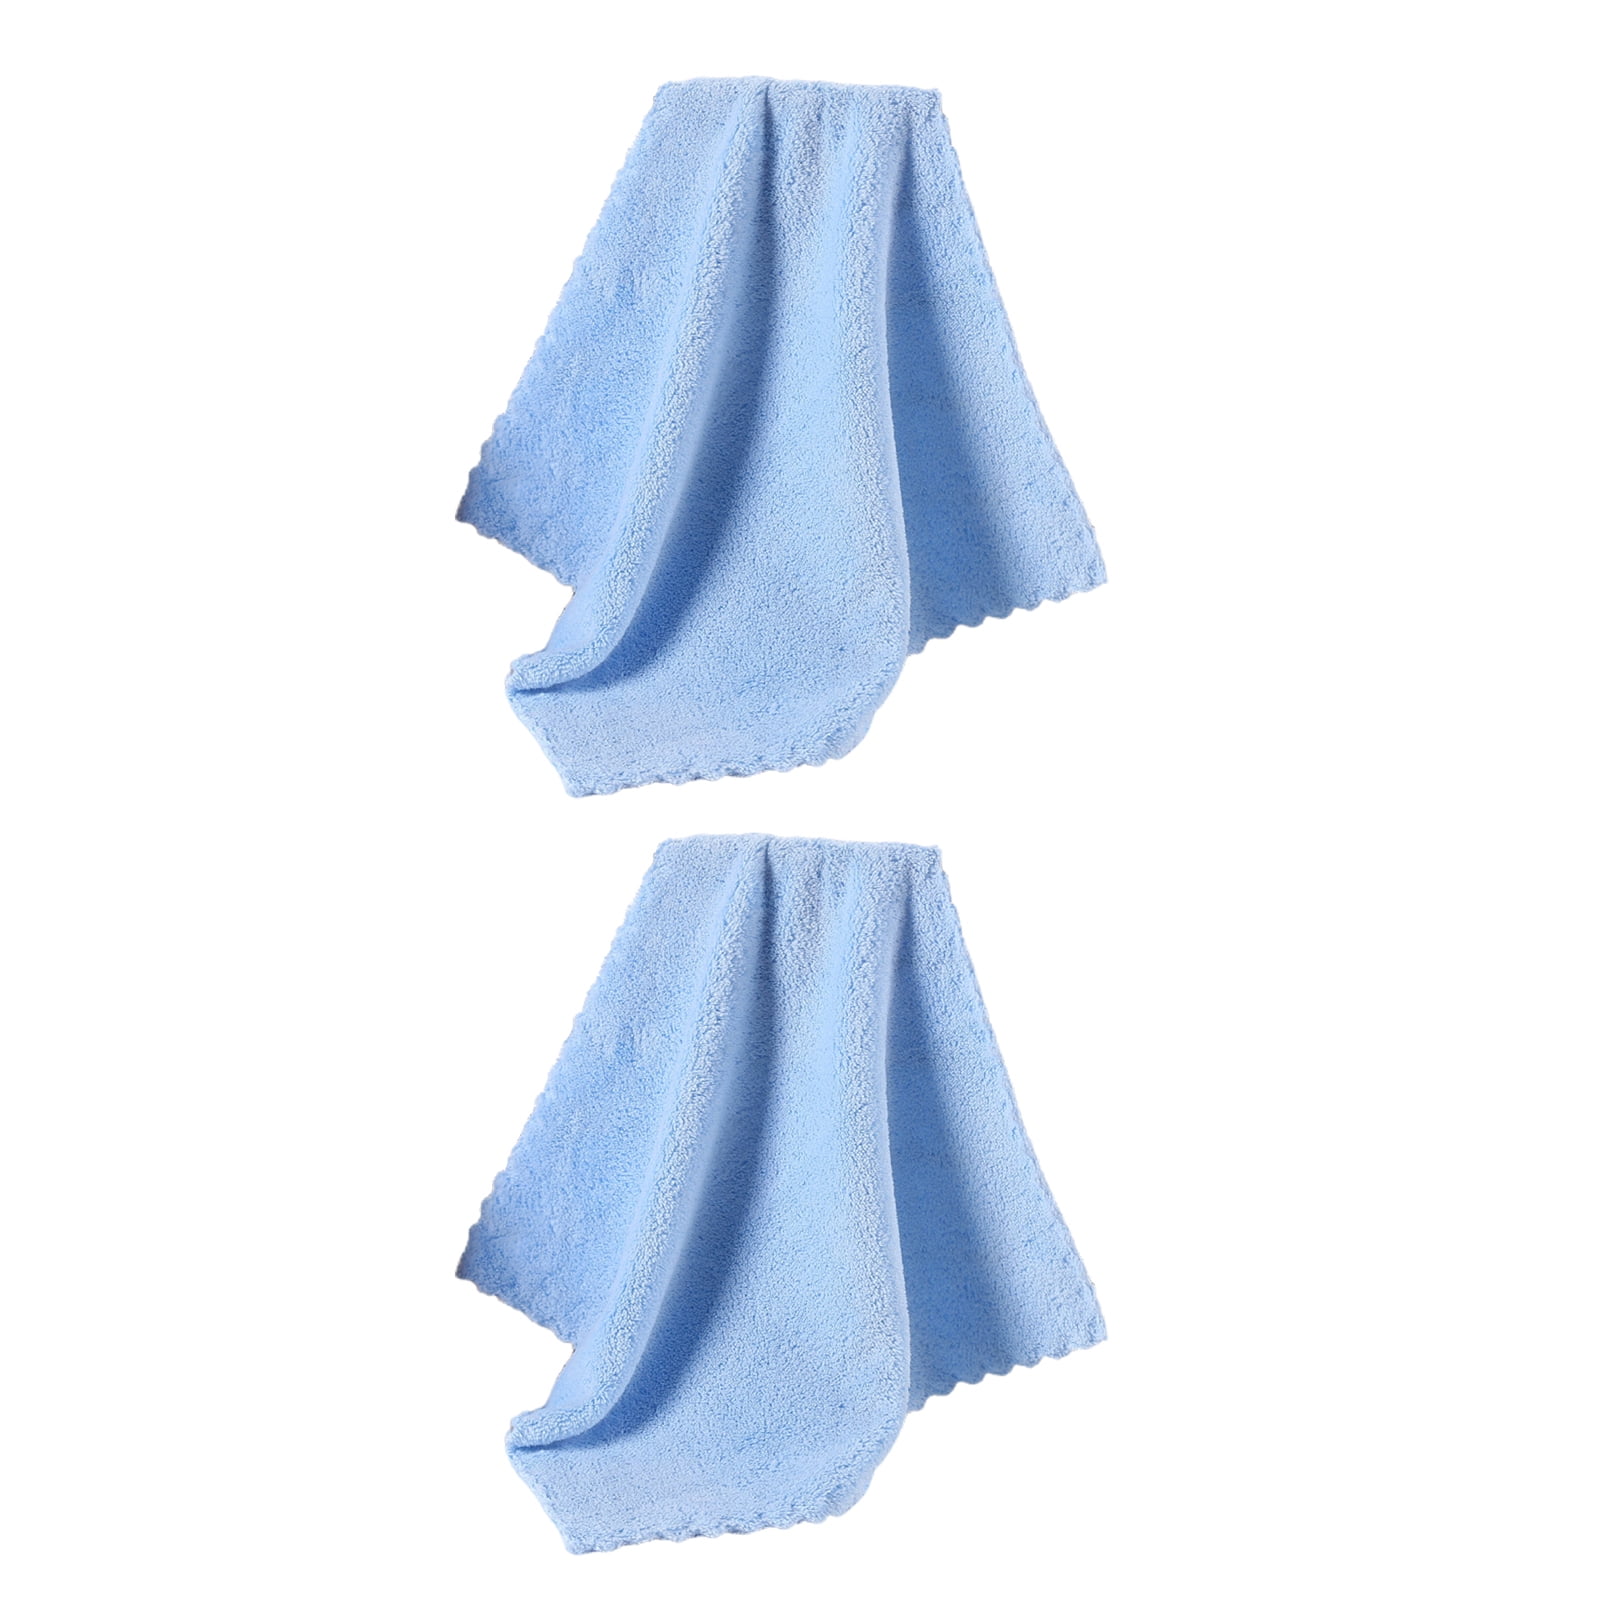 Details about   1200 Pieces New Wash Cloth Face Towel Gym Cleaning Towels 12x12 100% Cotton 